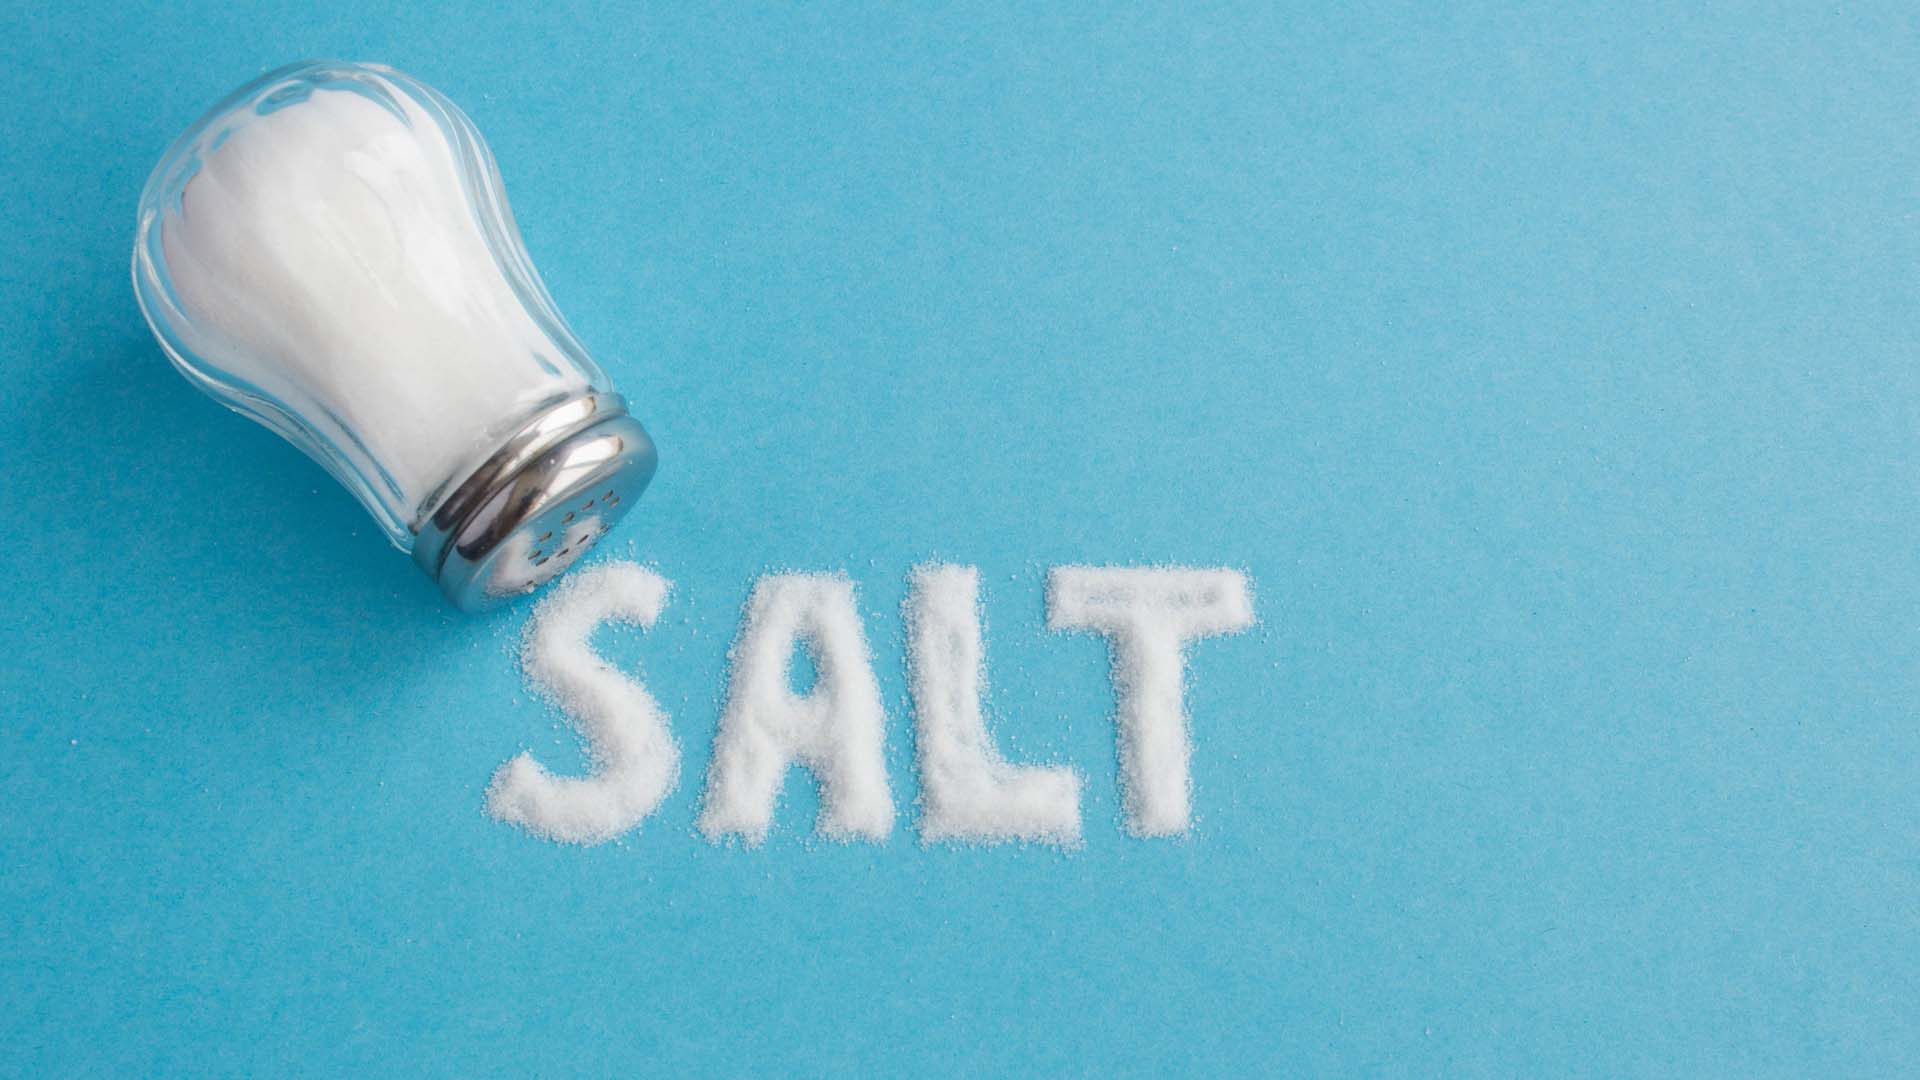 a salt cellar on its side with the word salt written out in salt on a blue background